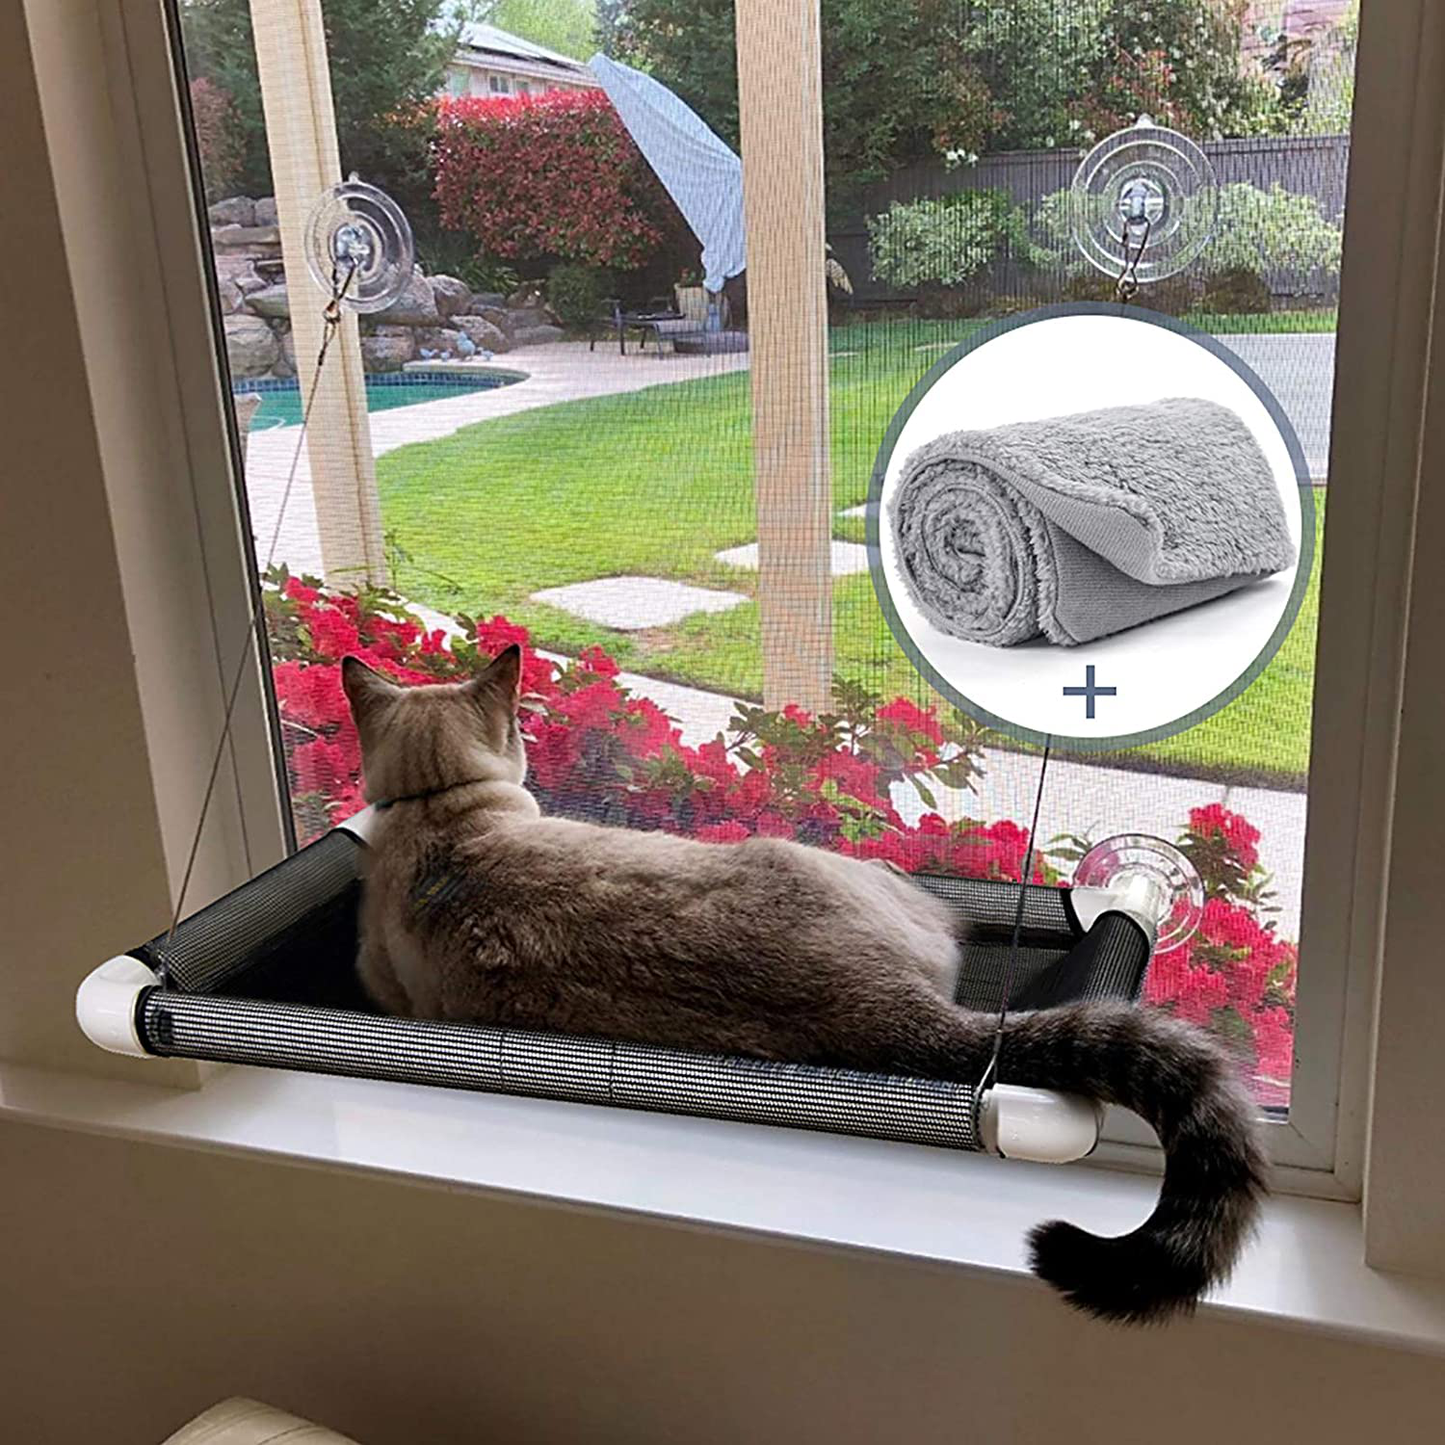 Lcybem Cat Window Perch - Cat Hammocks for Window with Plush Pad, Space Saving Cat Bed, Pet Resting Seat Safety Holds Two Large Cats, Providing All around 360° Sunbathe for Indoor